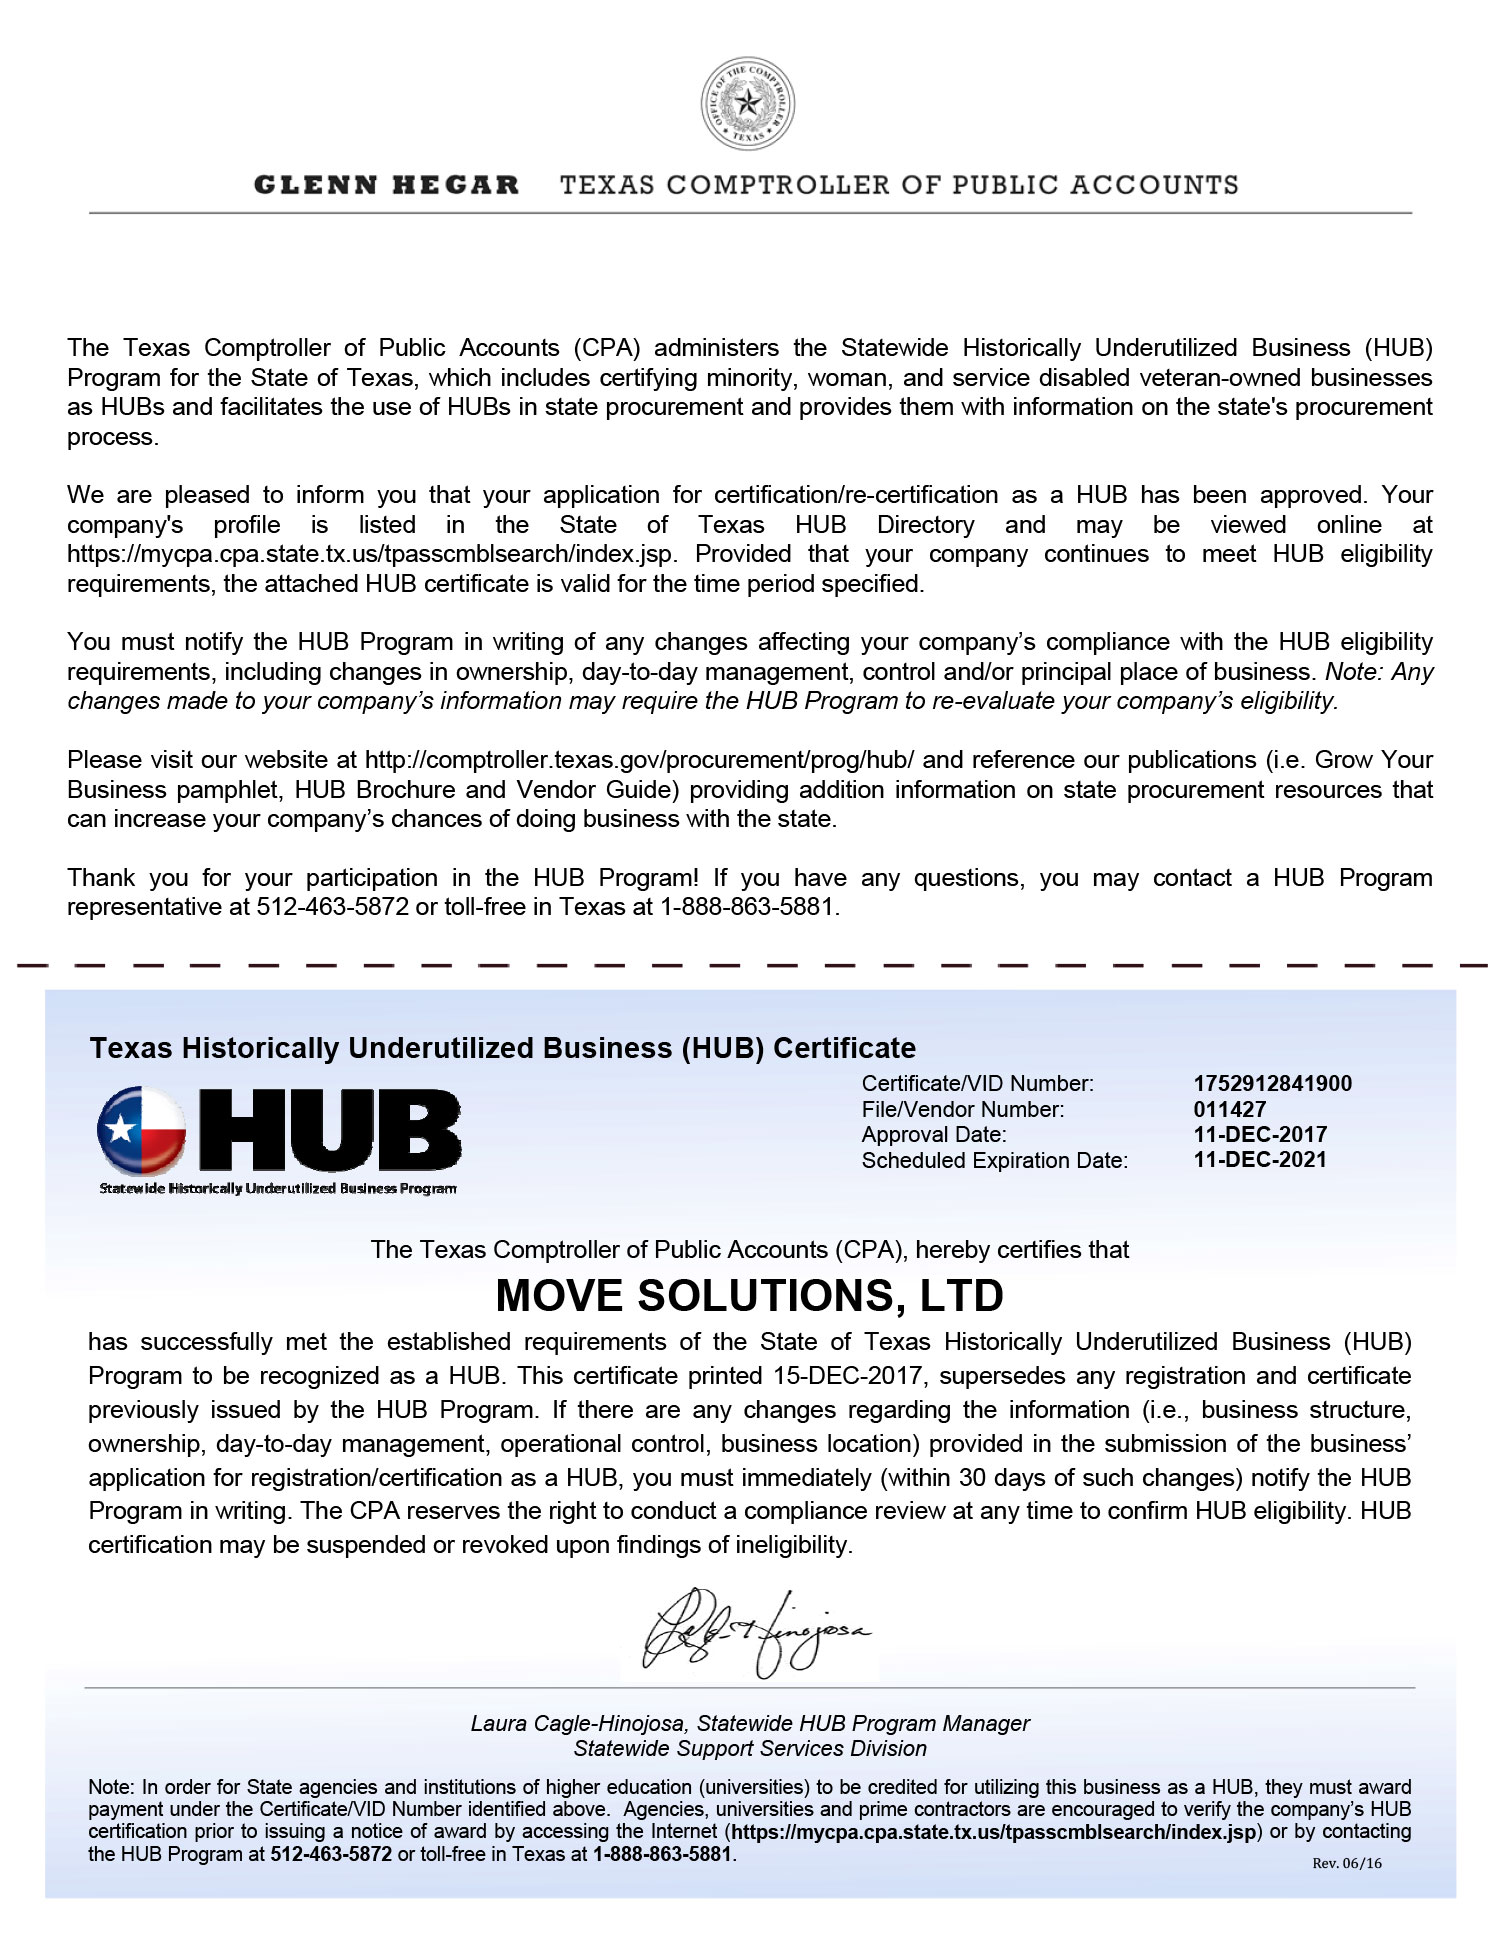 Texas Historically Underutilized Business (HUB) Certificate